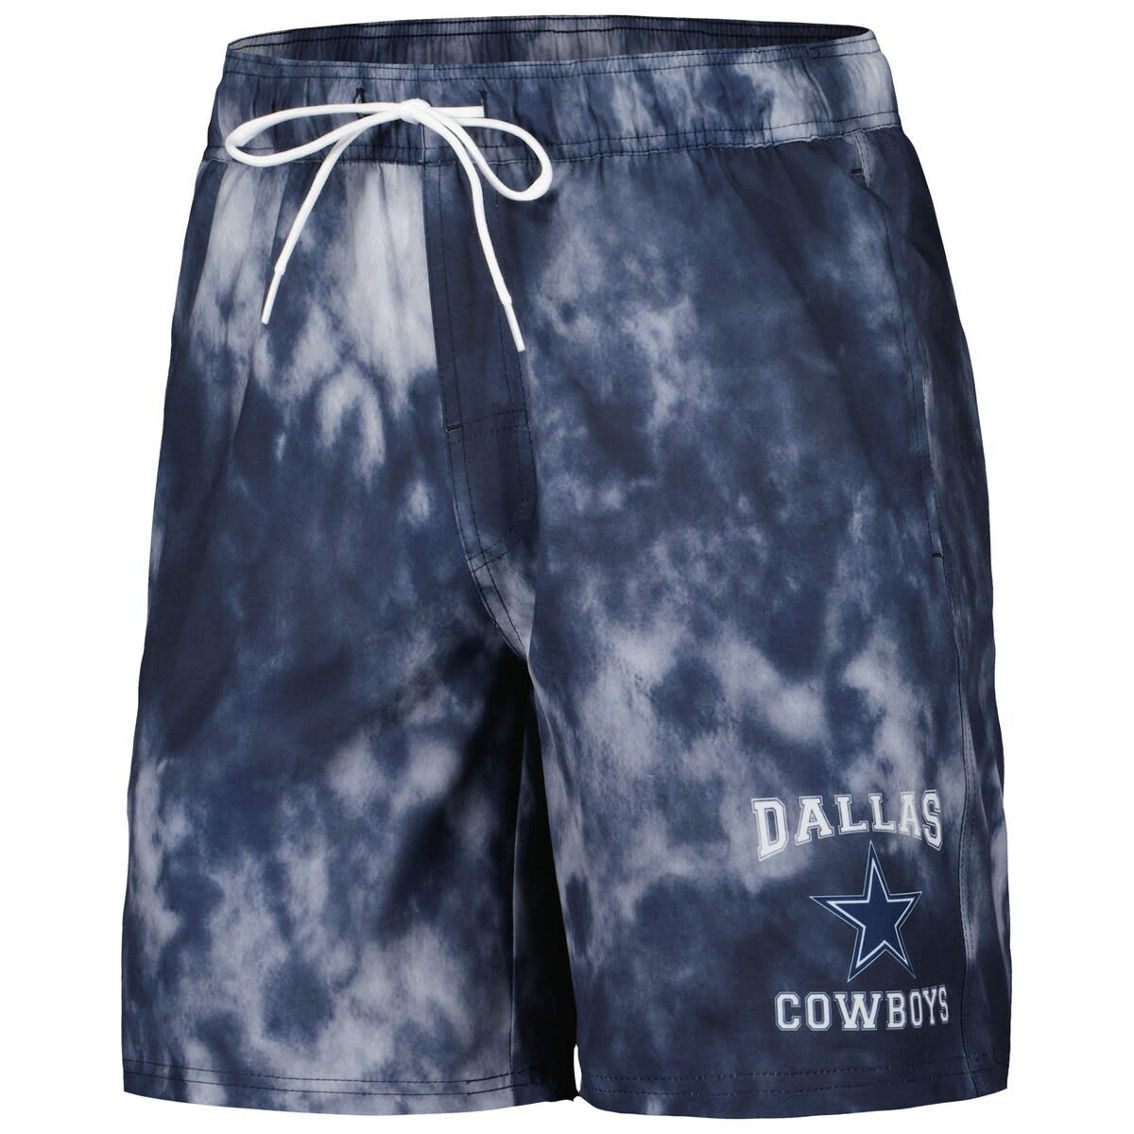 G-III Extreme Men's G-III Extreme Navy Dallas Cowboys Change Up Volley Swim Trunks - Image 3 of 4